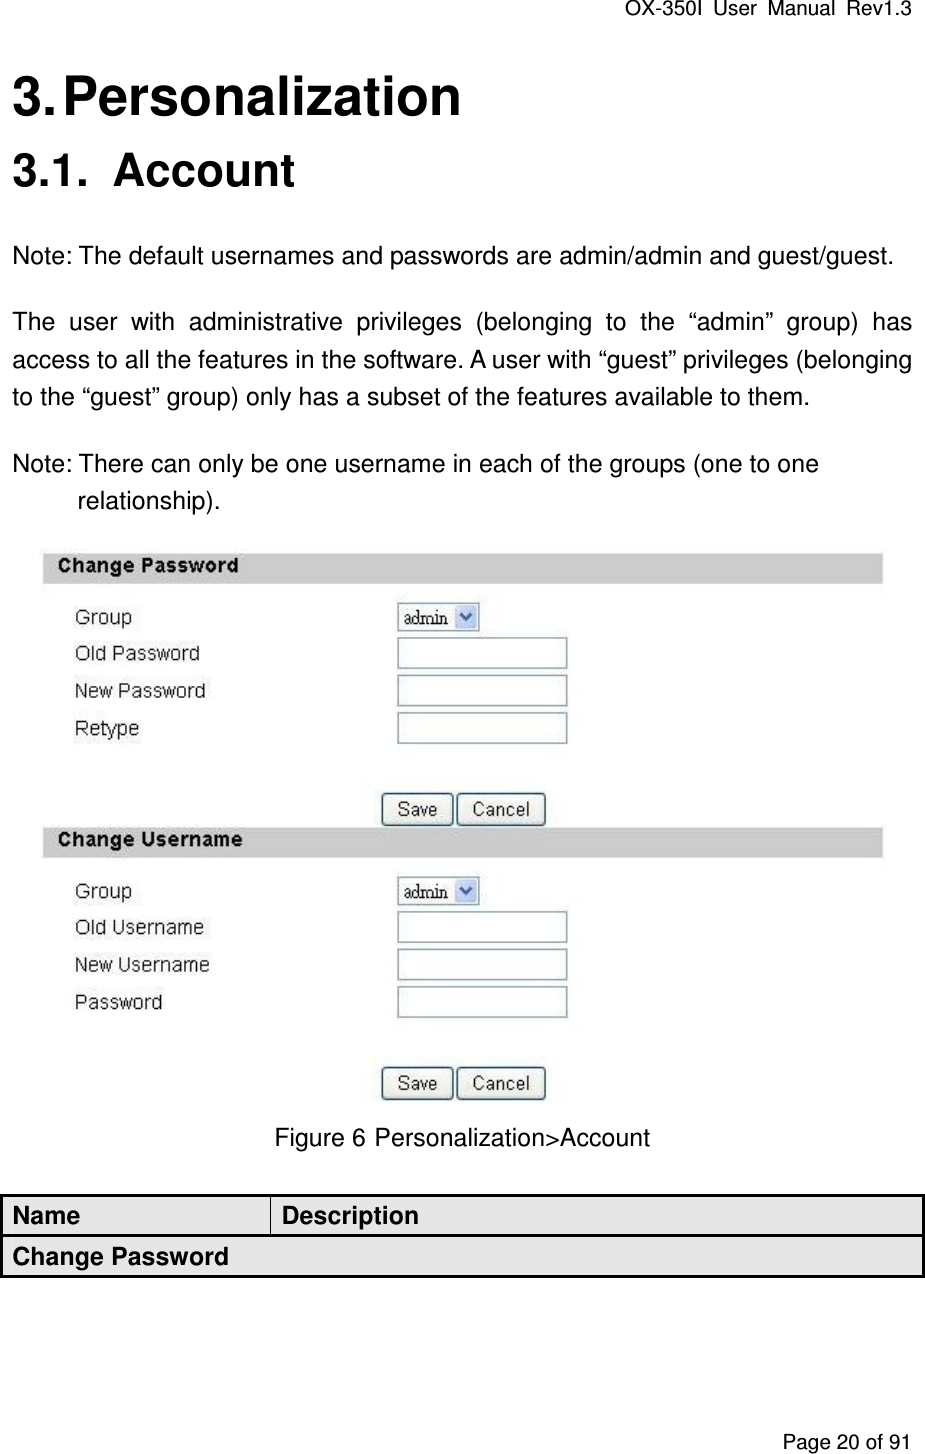 OX-350I  User  Manual  Rev1.3 Page 20 of 91 3. Personalization 3.1.  Account Note: The default usernames and passwords are admin/admin and guest/guest. The  user  with  administrative  privileges  (belonging  to  the  “admin”  group)  has access to all the features in the software. A user with “guest” privileges (belonging to the “guest” group) only has a subset of the features available to them. Note: There can only be one username in each of the groups (one to one relationship).  Figure 6 Personalization&gt;Account Name  Description Change Password 